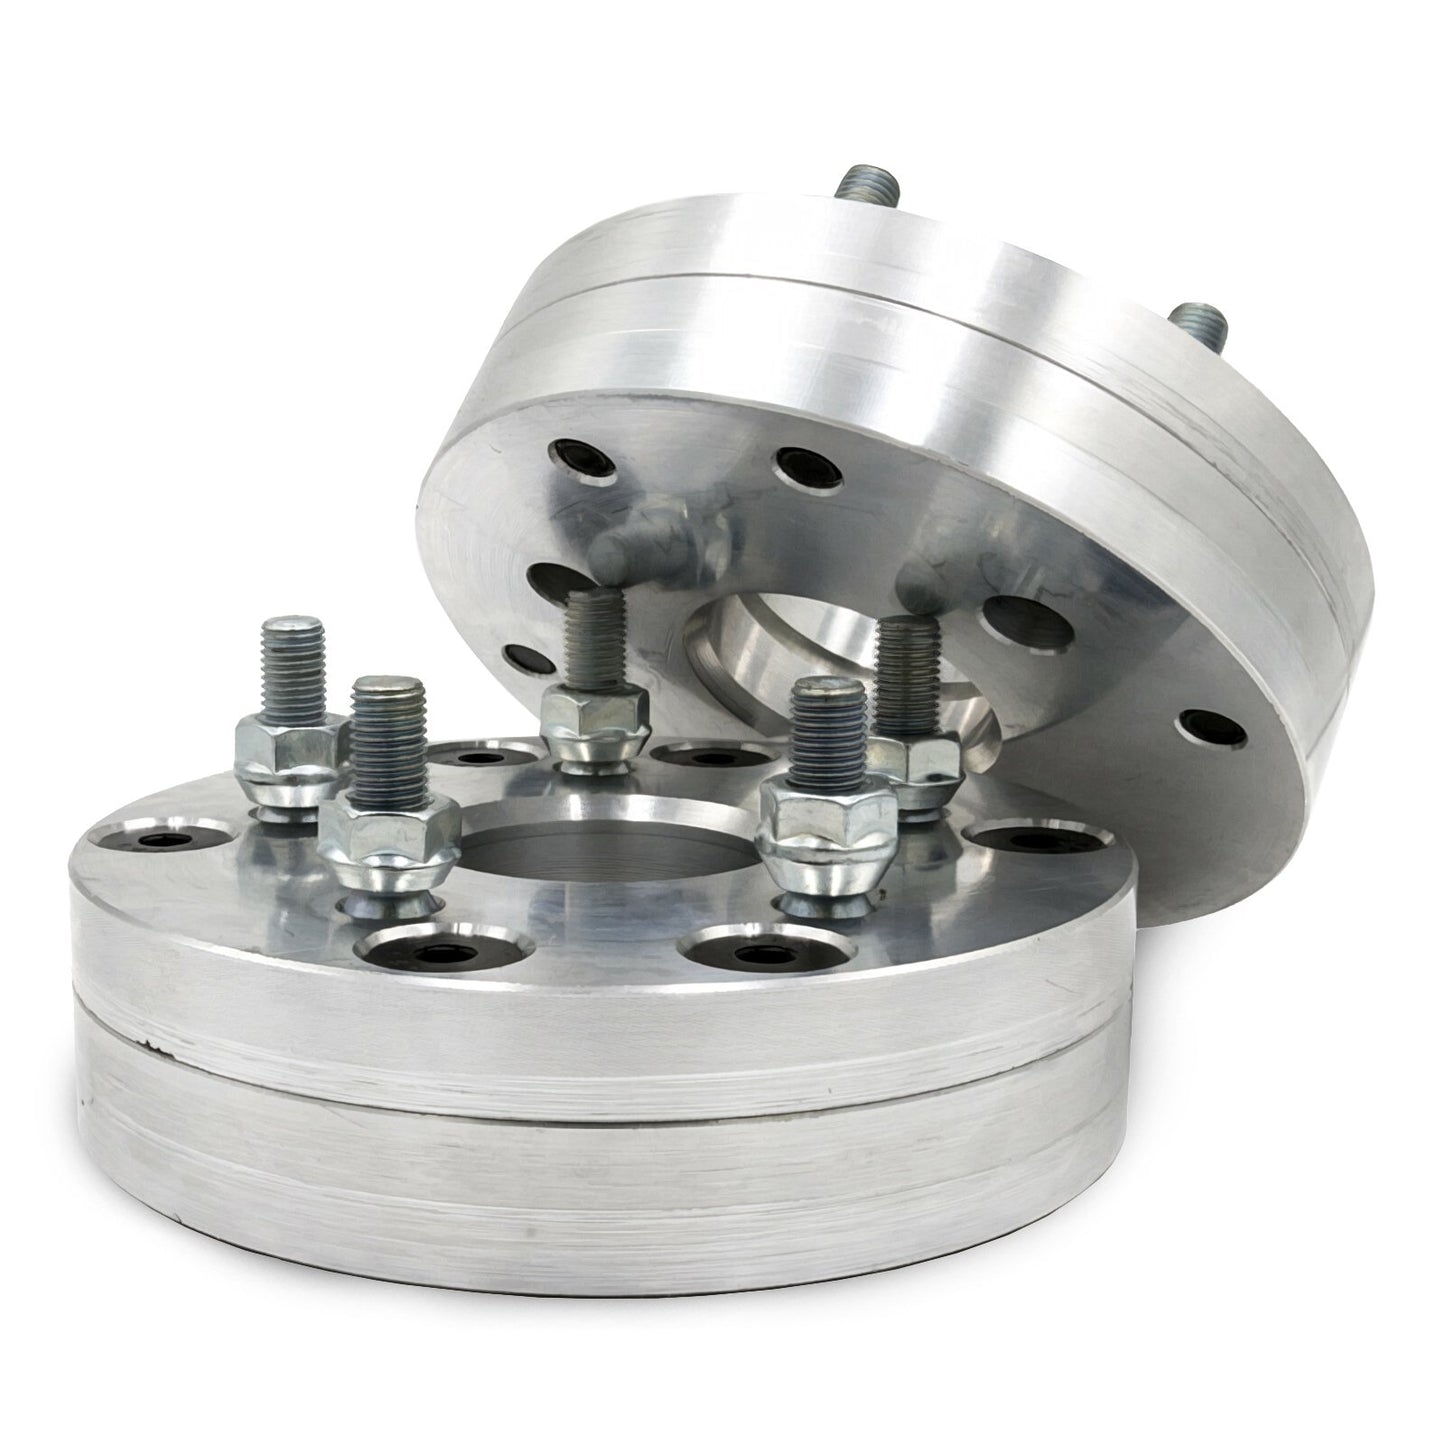 4x110 to 5x115 2 piece Wheel Adapter - Thickness: 1.5" - 3"